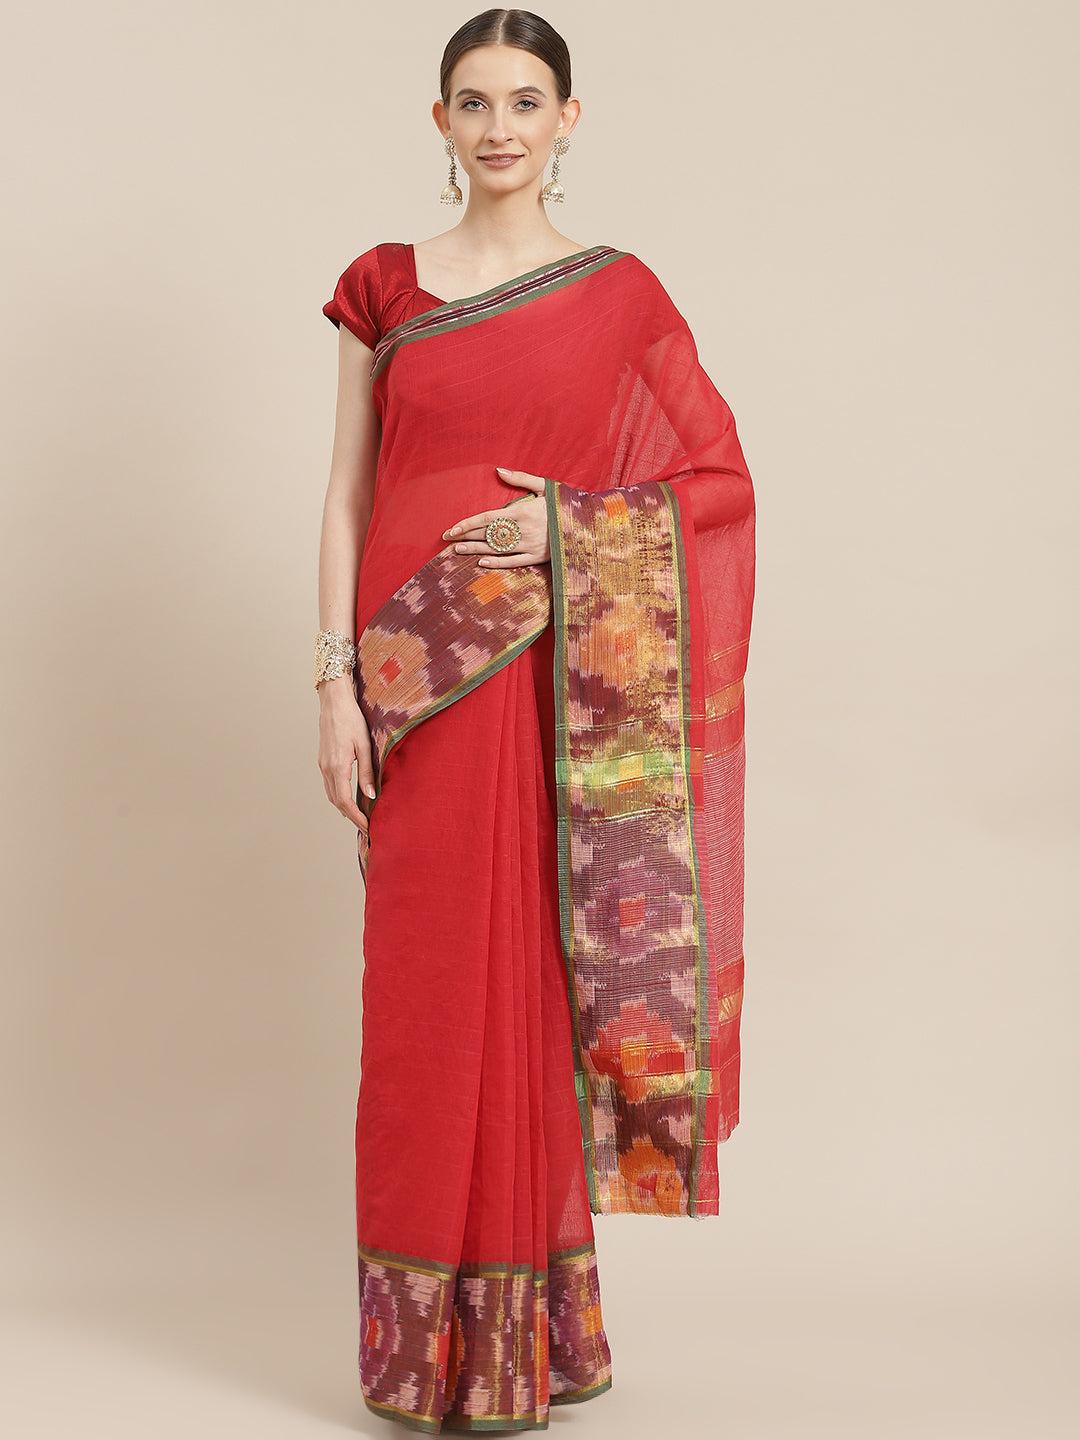 ishin-women's-cotton-blend-red-solid-woven-pochampally-saree-with-blouse-piece